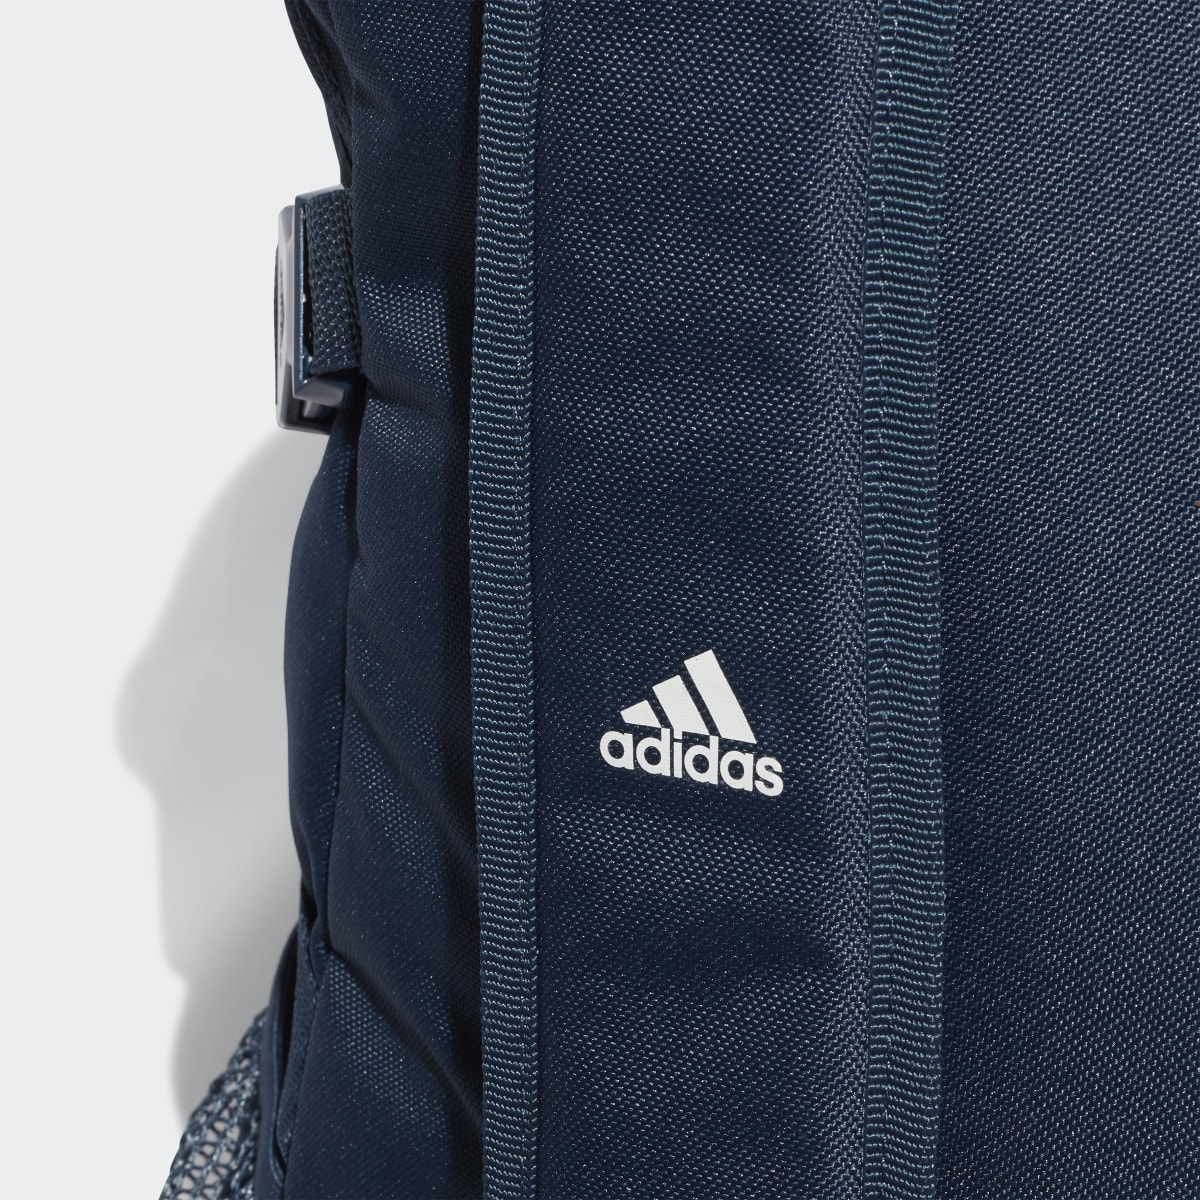 Adidas Power 5 Backpack. 6